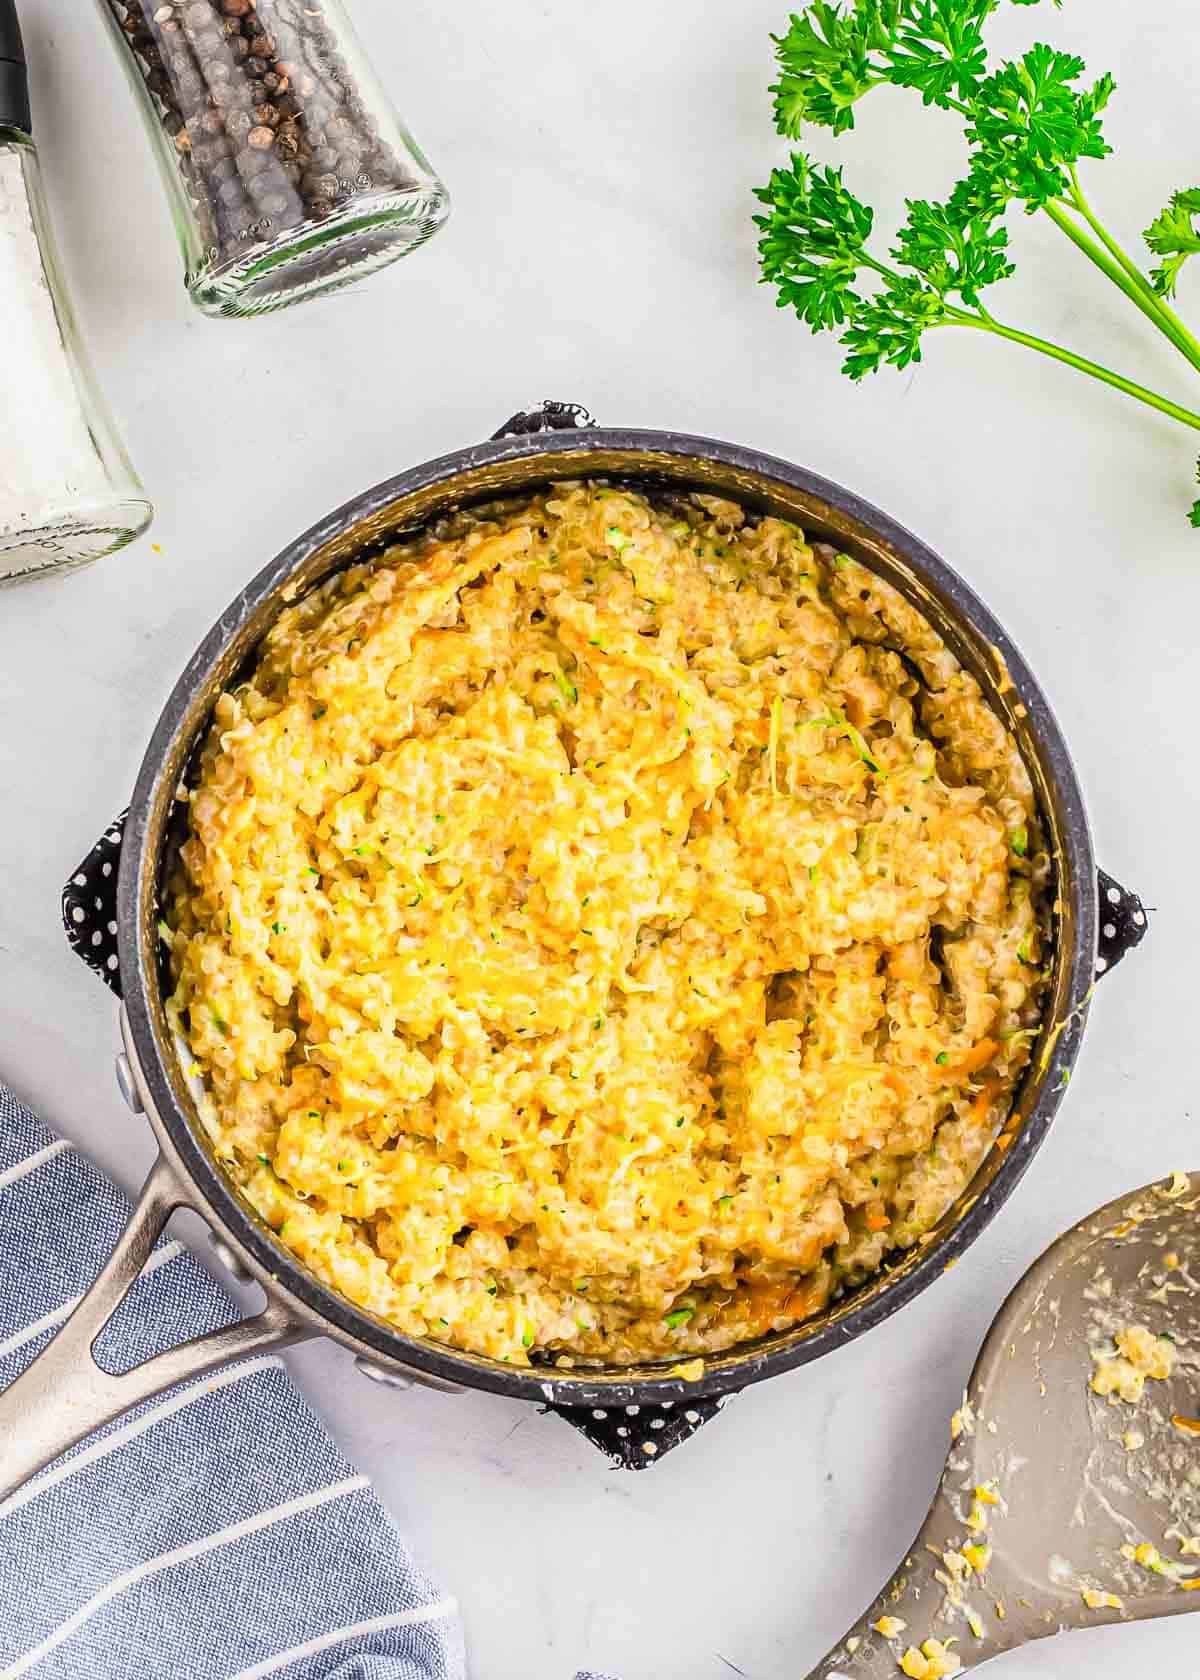 A skillet filled with cheesy quinoa and shredded zucchini.